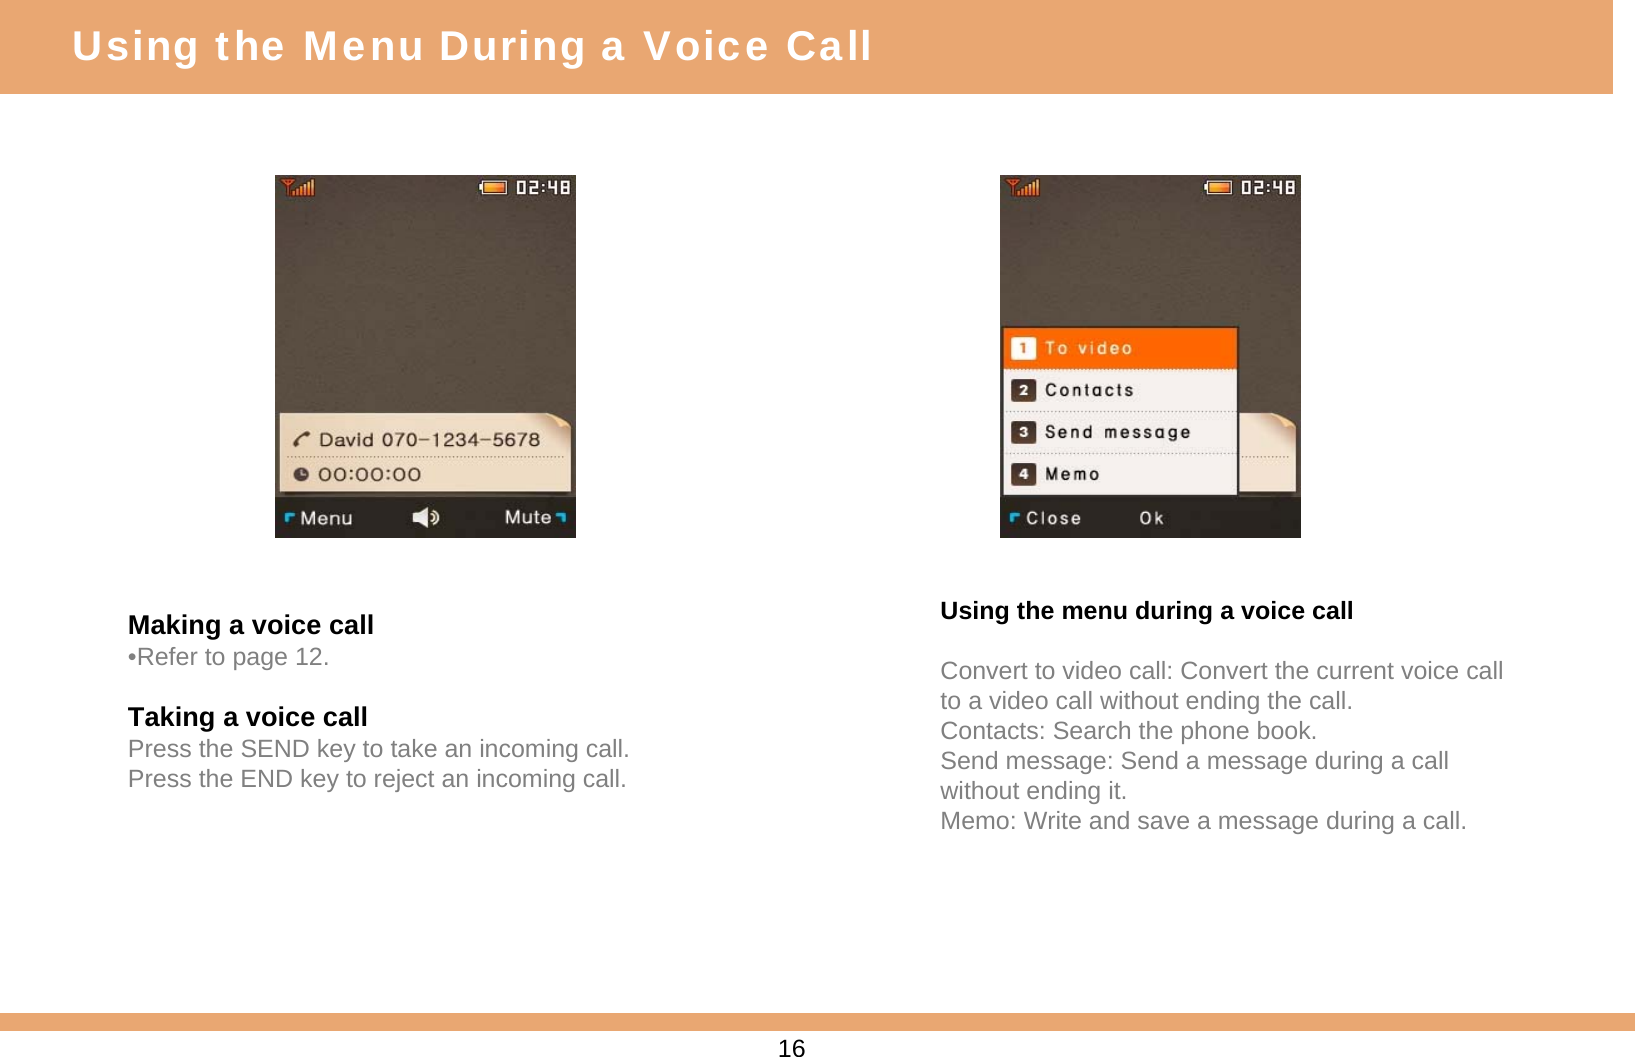 Making a voice call•Refer to page 12.Taking a voice callPress the SEND key to take an incoming call.Press the END key to reject an incoming call.Using the menu during a voice callConvert to video call: Convert the current voice call to a video call without ending the call.Contacts: Search the phone book.Send message: Send a message during a call without ending it.Memo: Write and save a message during a call.16Using the Menu During a Voice Call